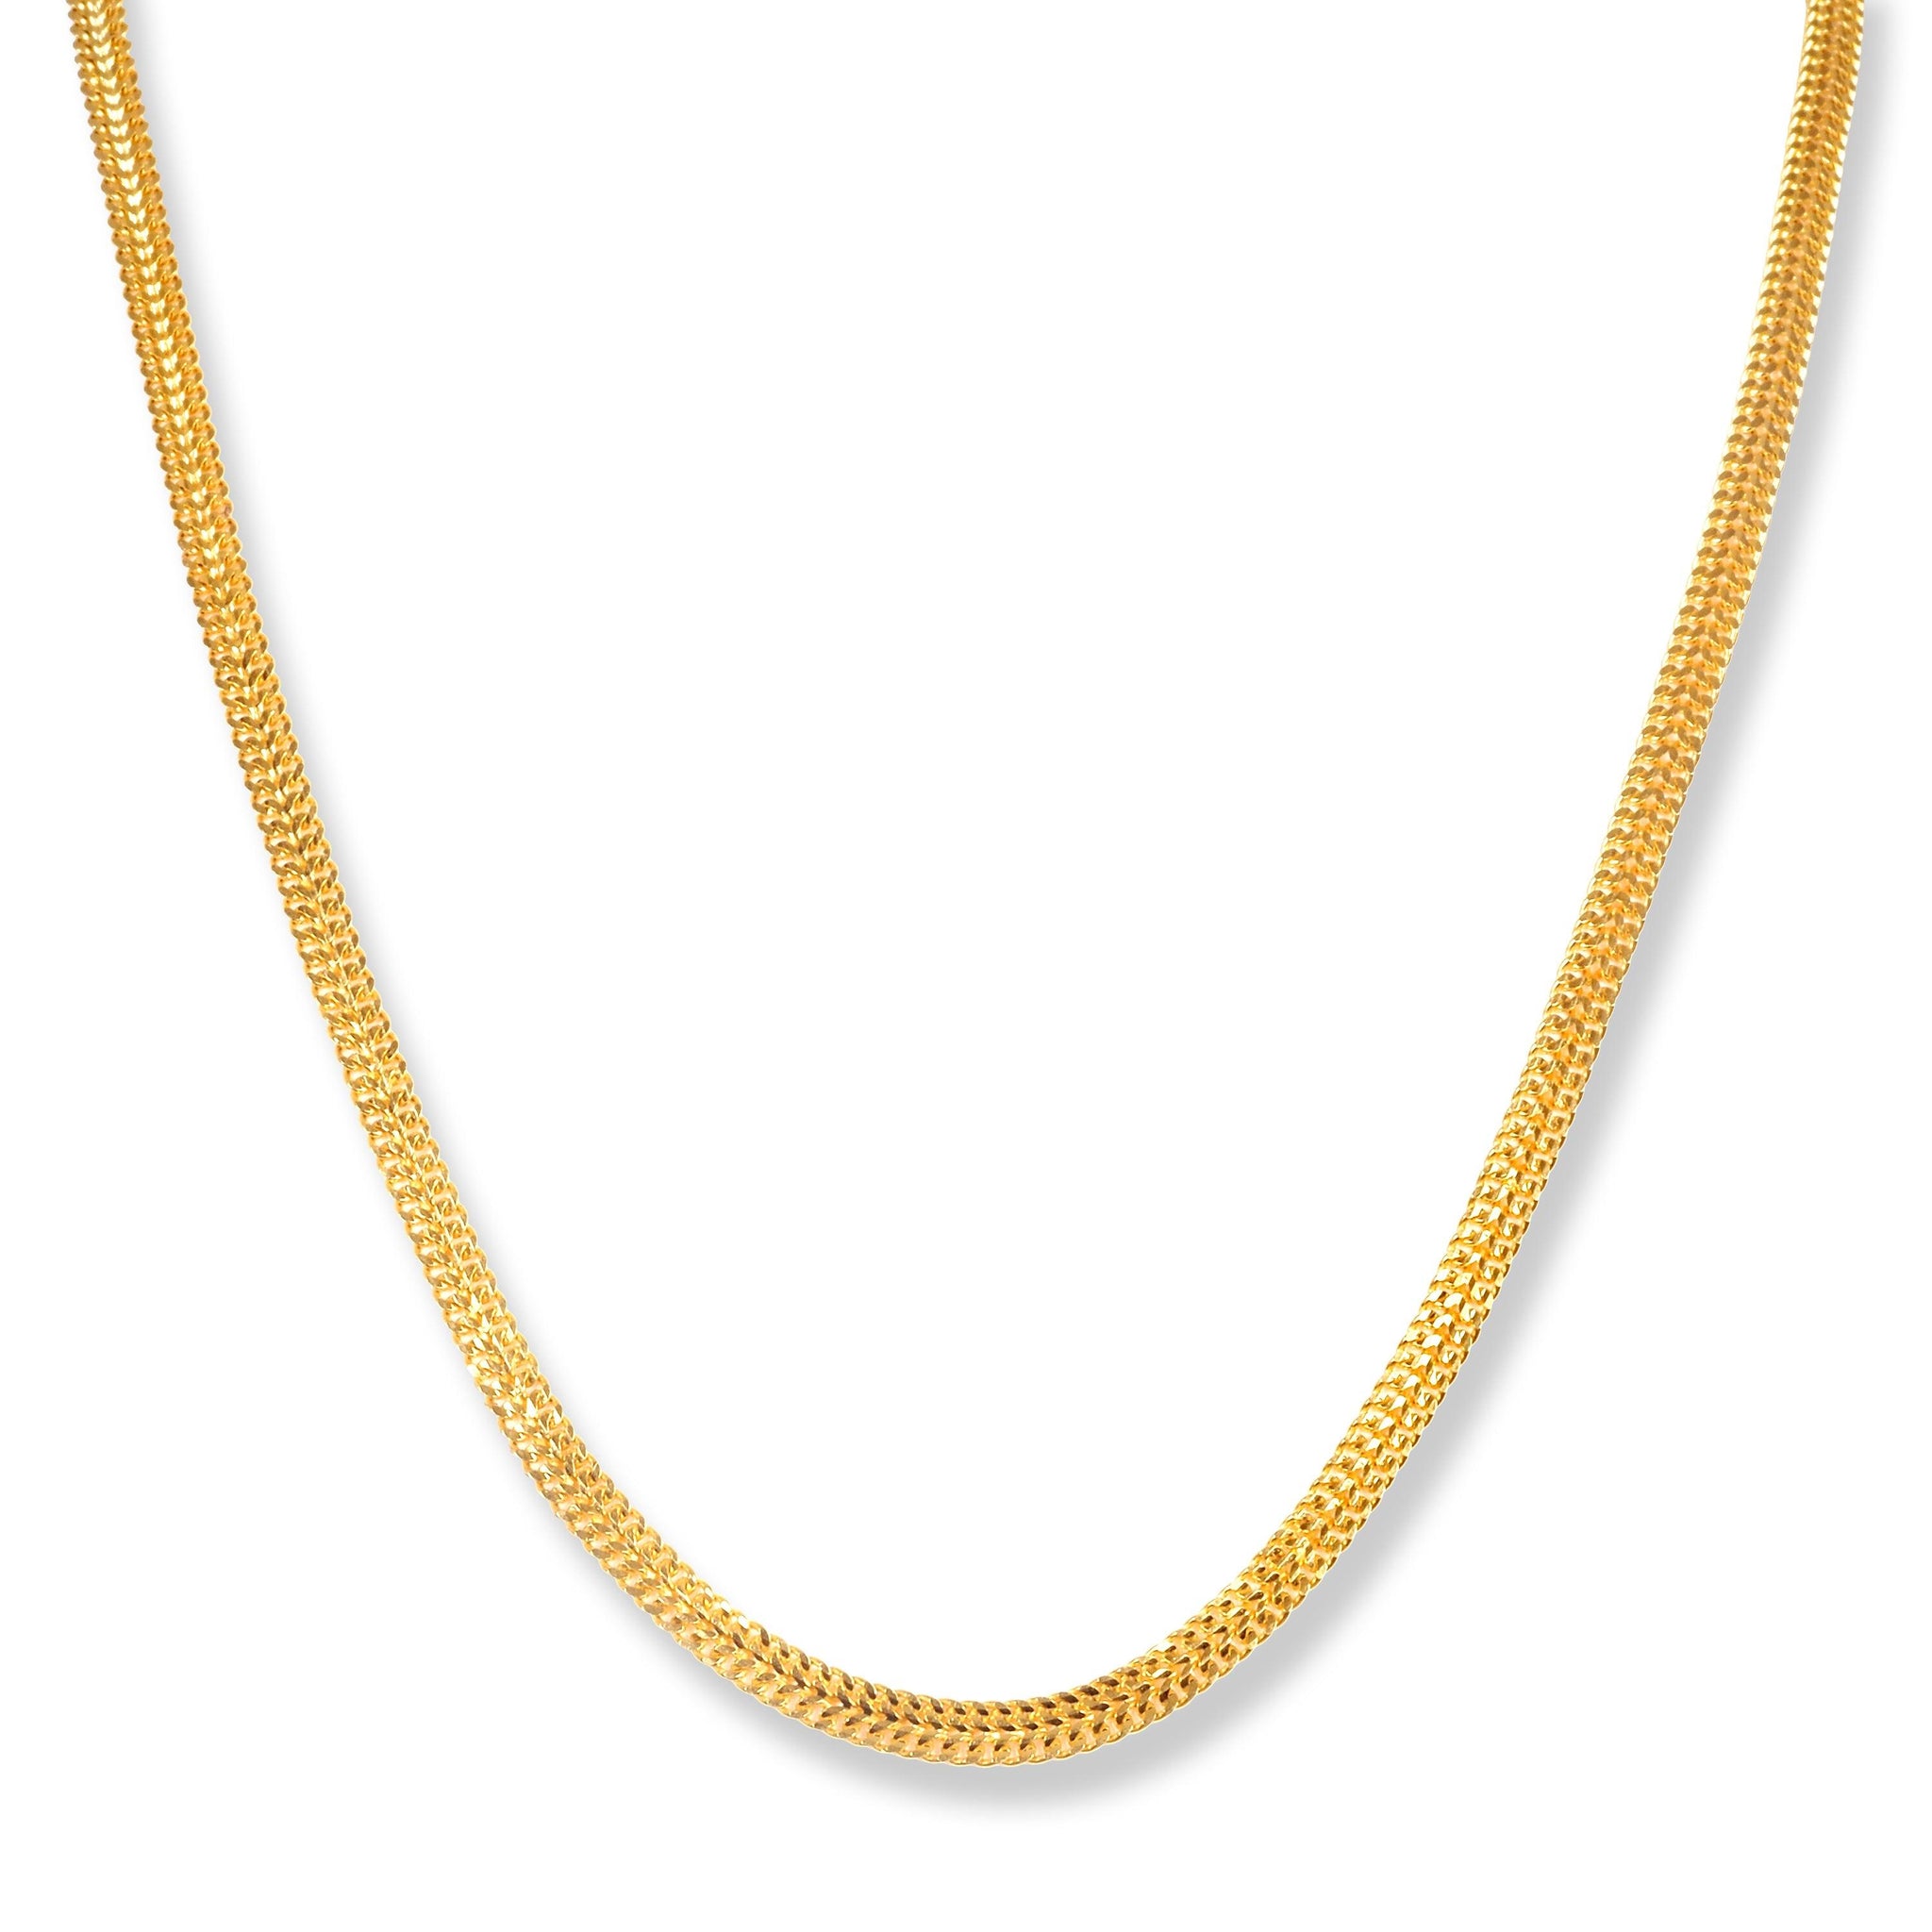 22ct Gold Flat Chain with S Clasp C-7140